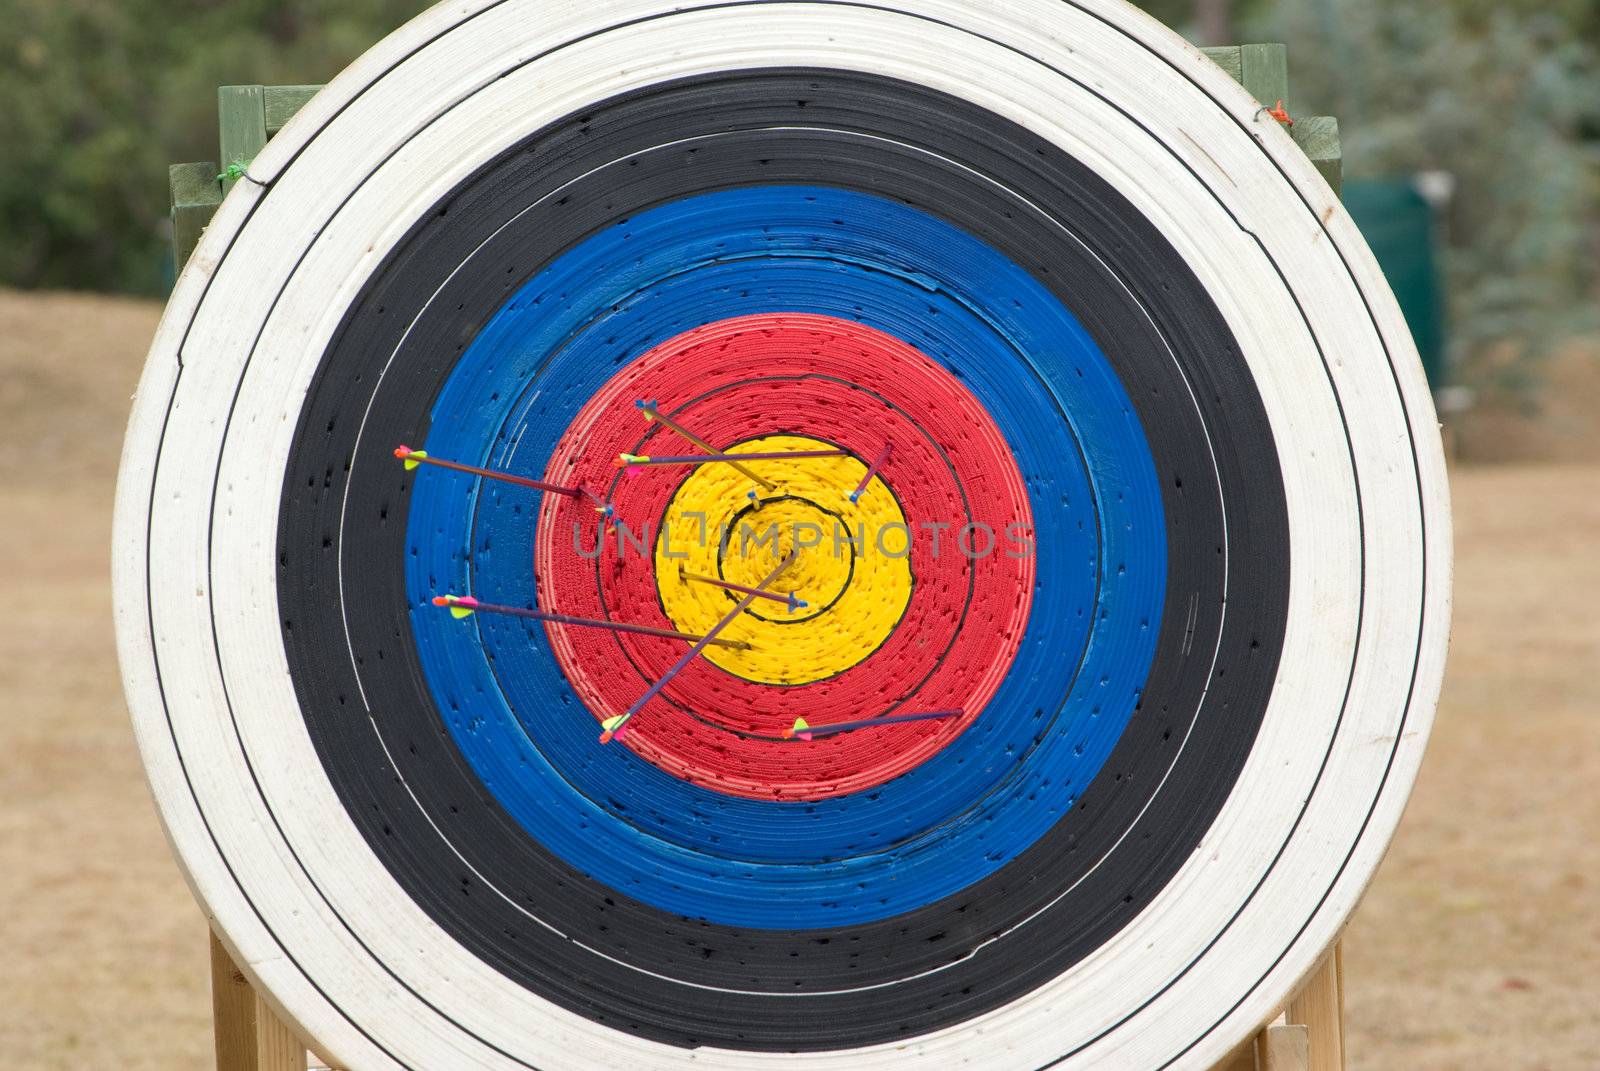 image of an archery target full of arrows